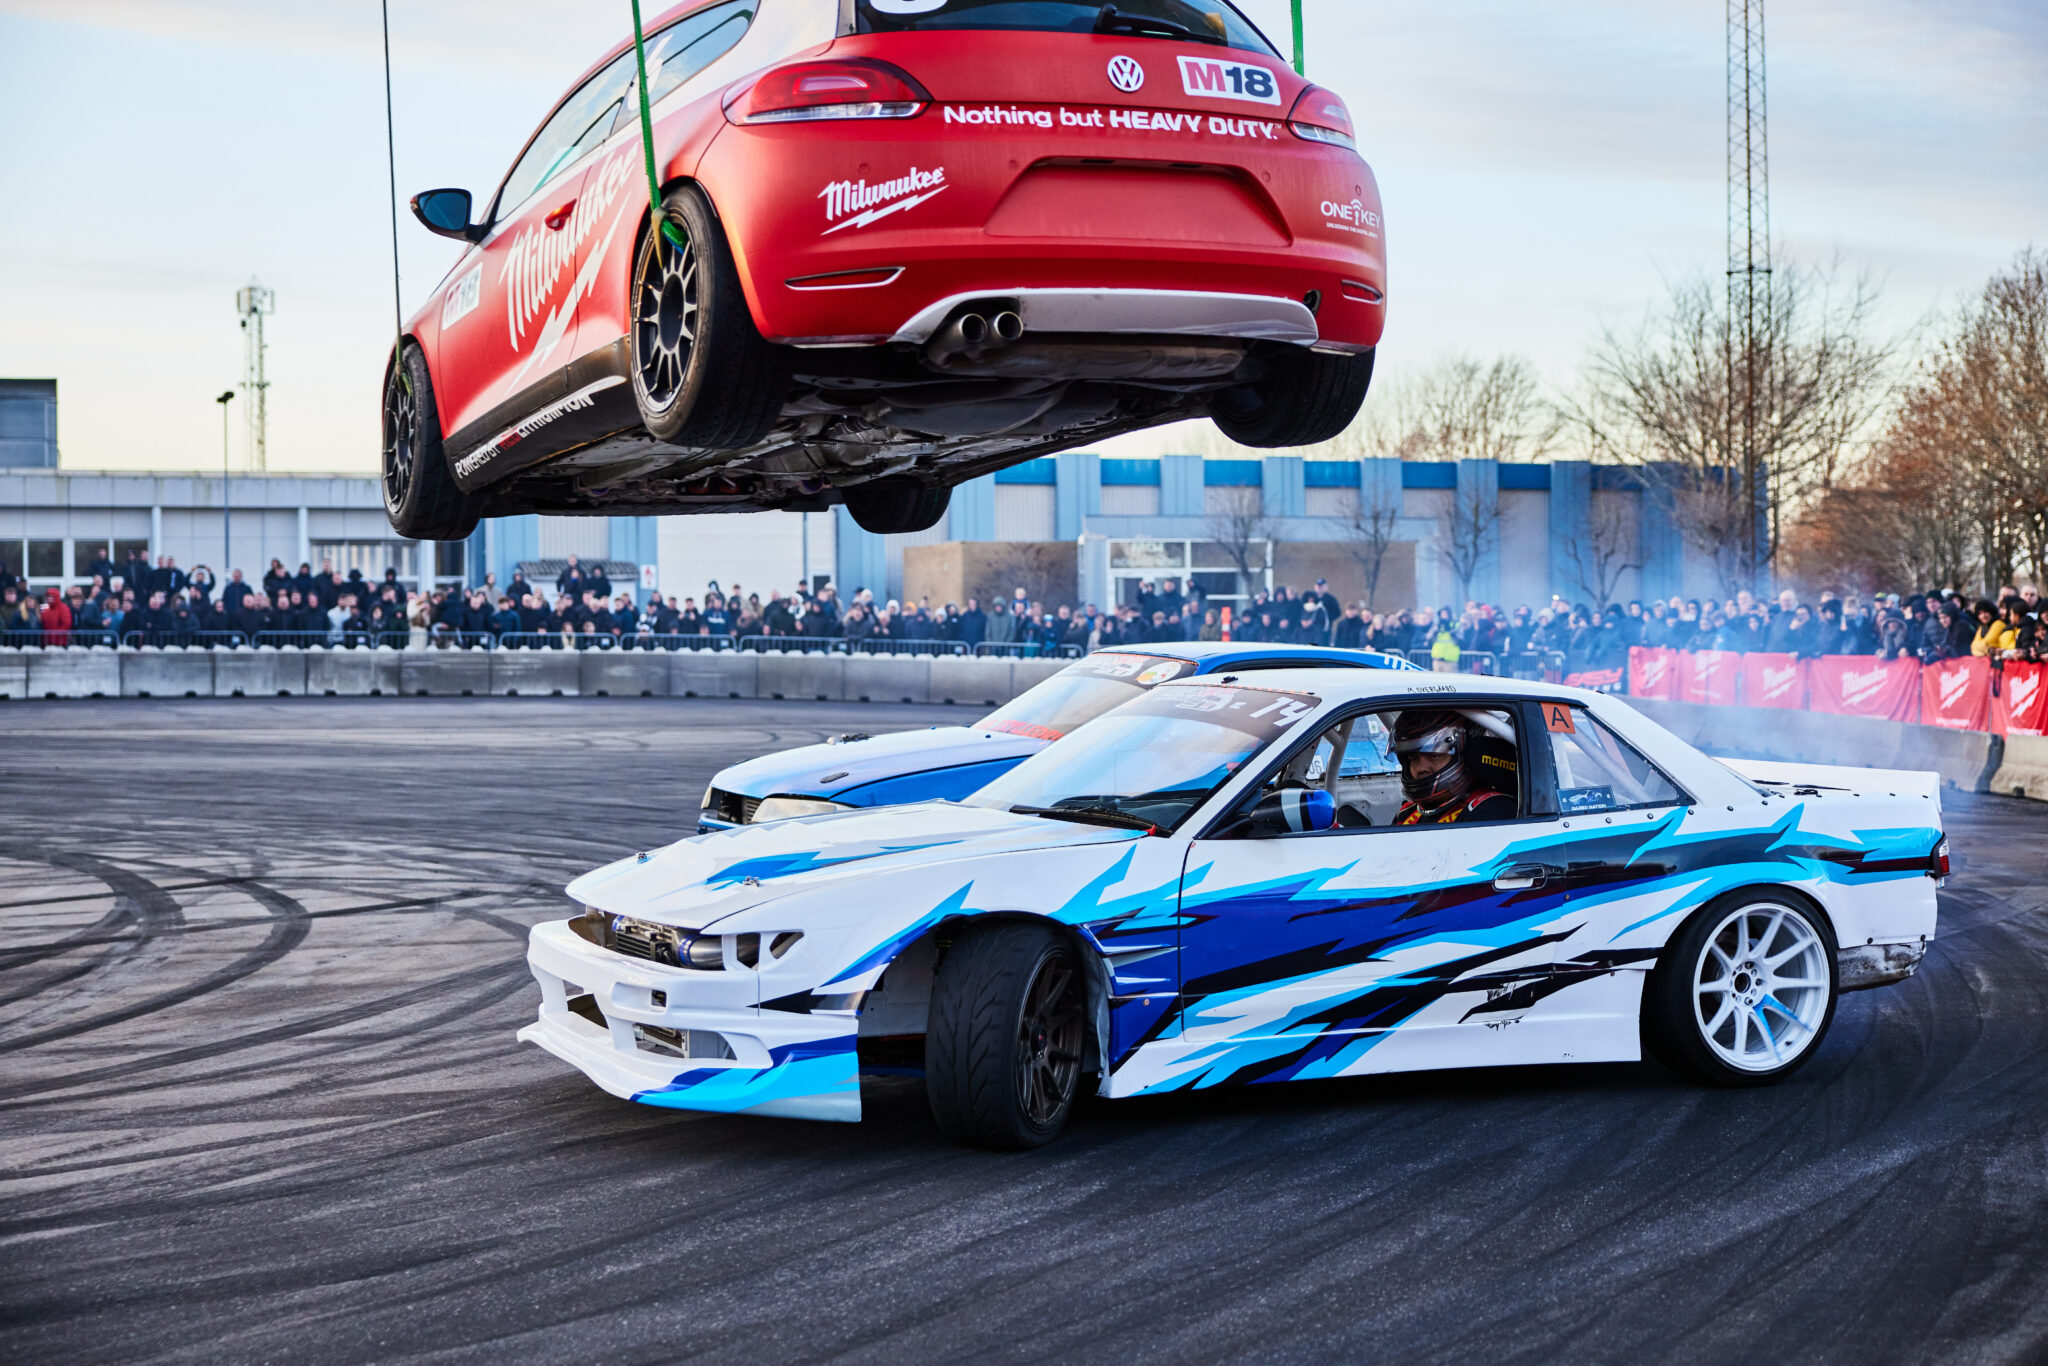 Action event i Herning med drifting - Fotograf Theis